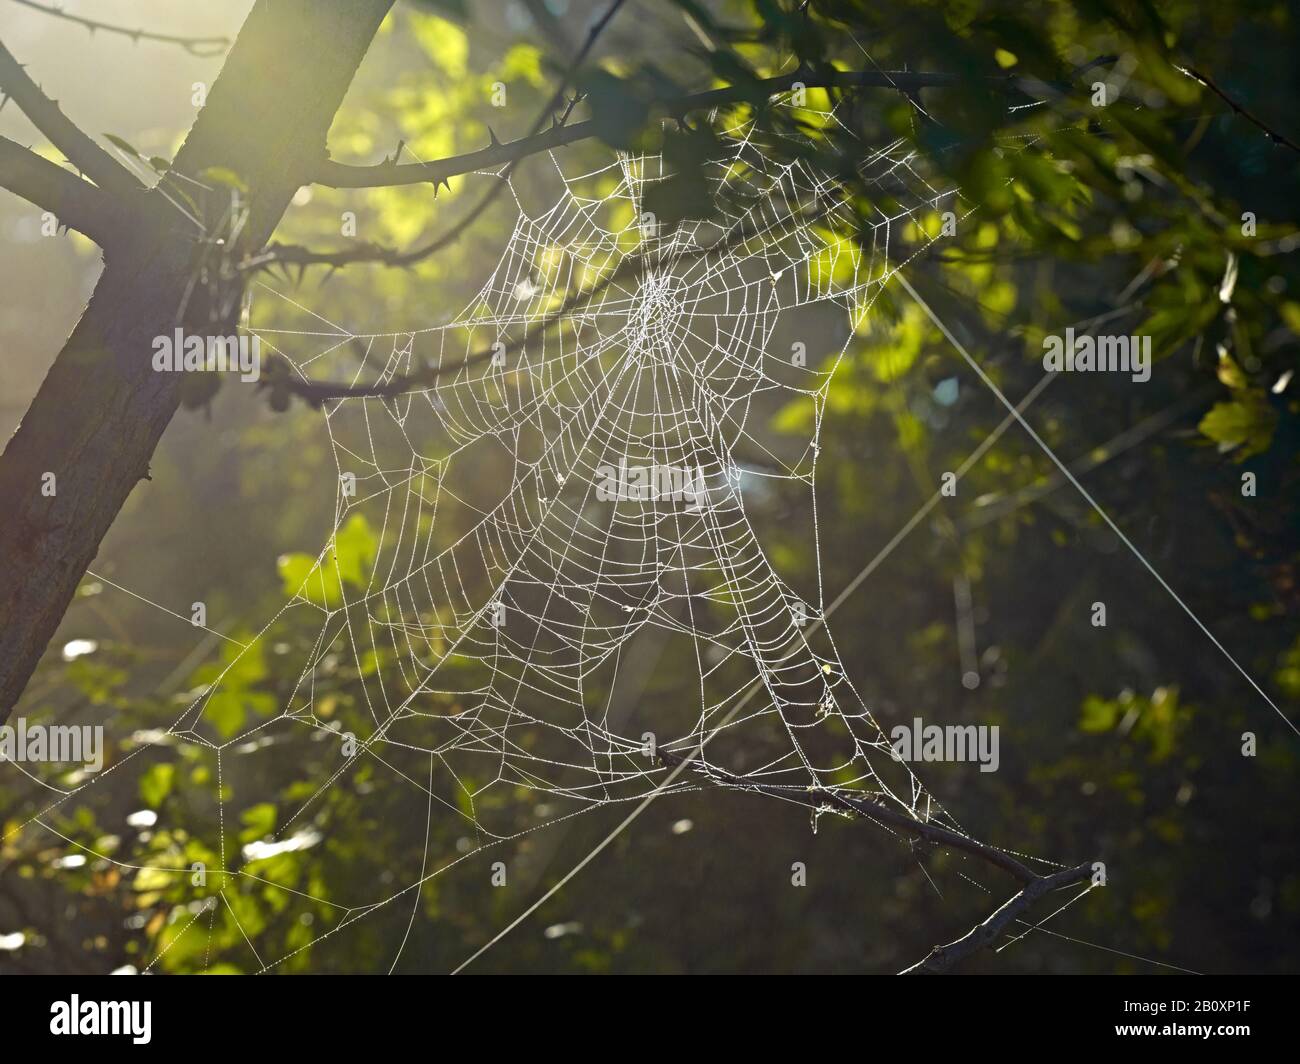 Spider web with dew drops in autumn, Stock Photo